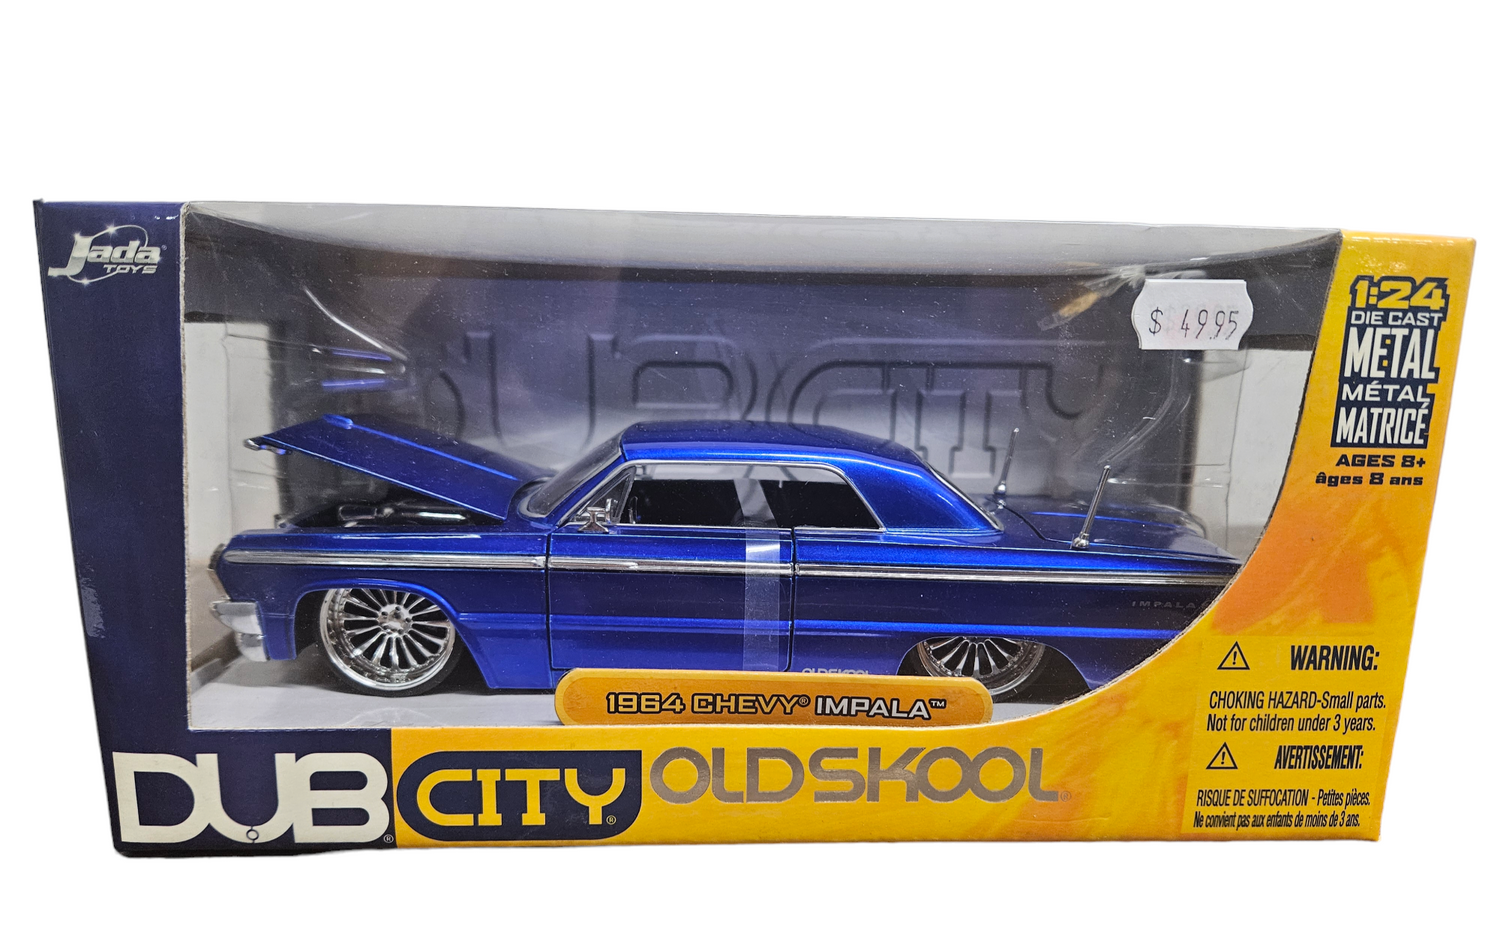 1964 CHEVROLET IMPALA LOWRIDER ELECTRIC BLUE NEW in 1:24